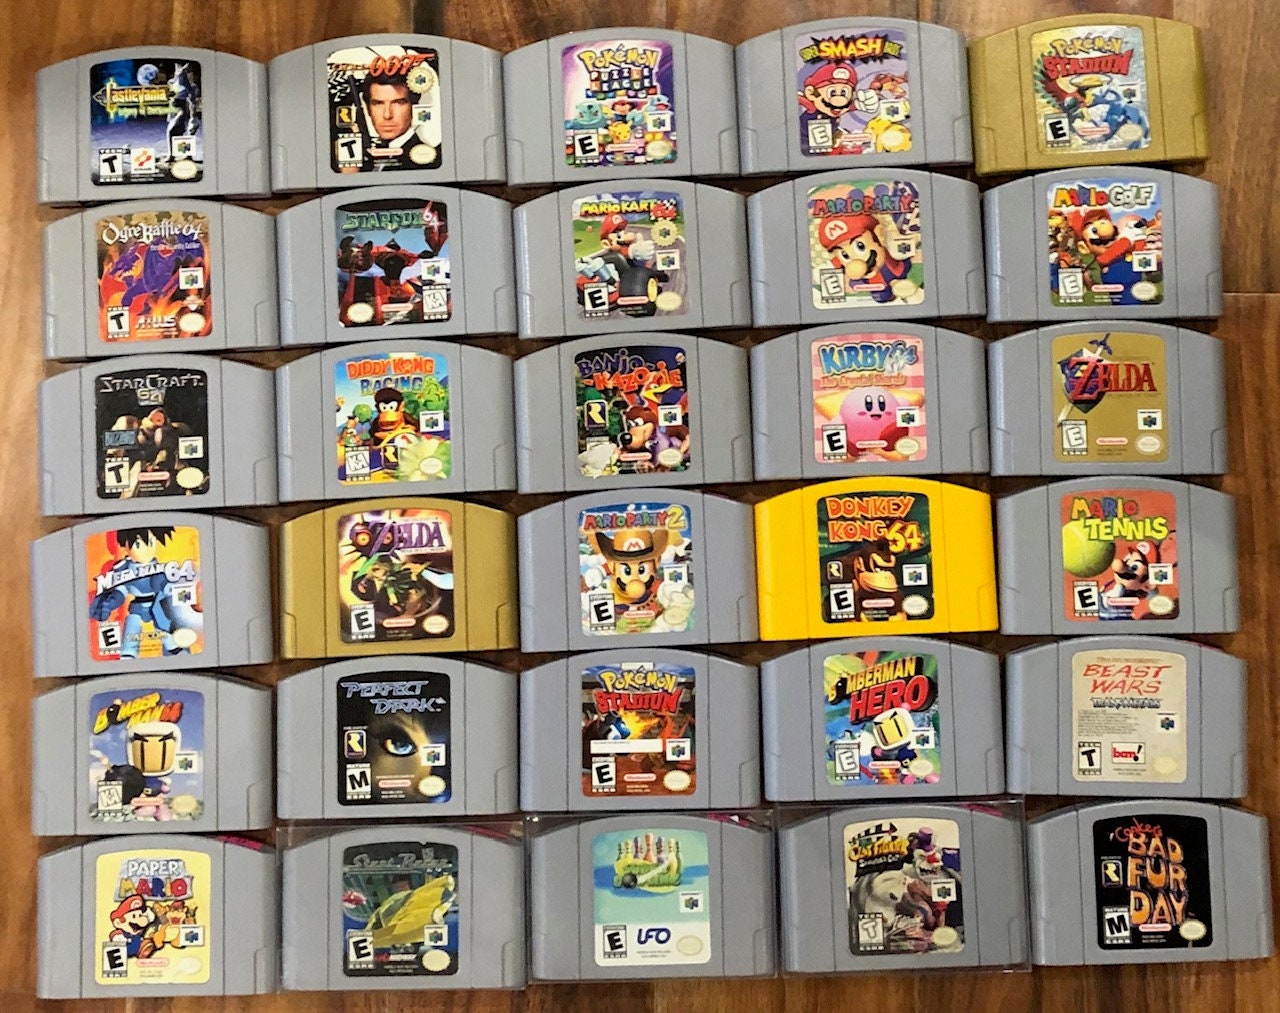 Listing 1 of 5 Nintendo 64 Video Games N64 Please check out - Etsy.de